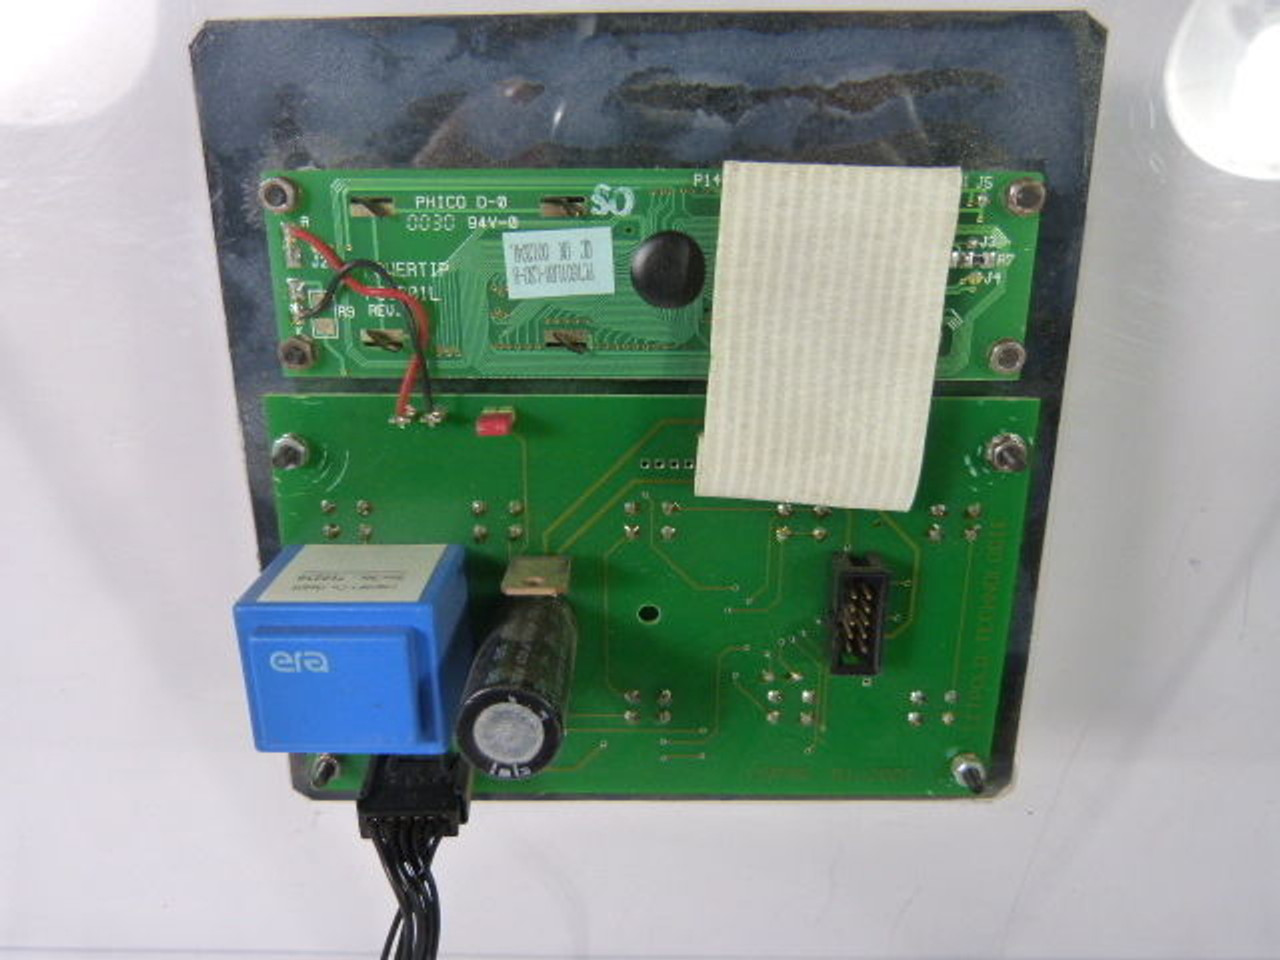 Process Q-LSP Controller Panel for Welder USED